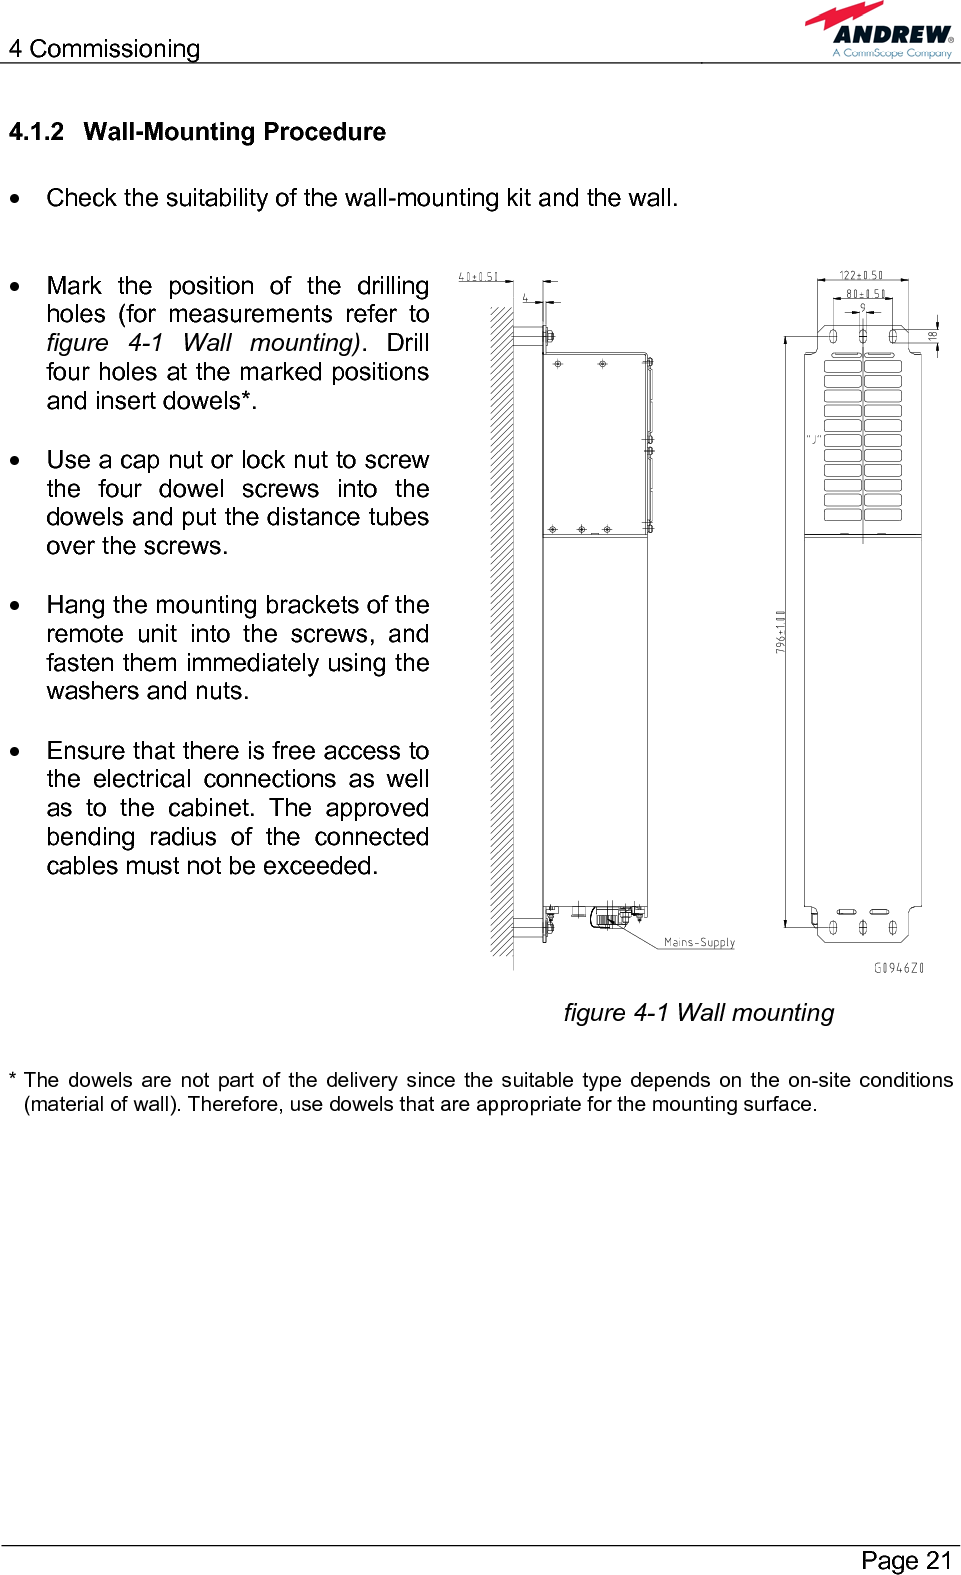 4 Commissioning       Page 21 4.1.2 Wall-Mounting Procedure  •  Check the suitability of the wall-mounting kit and the wall.   •  Mark the position of the drilling holes (for measurements refer to figure 4-1 Wall mounting). Drill four holes at the marked positions and insert dowels*.  •  Use a cap nut or lock nut to screw the four dowel screws into the dowels and put the distance tubes over the screws.  •  Hang the mounting brackets of the remote unit into the screws, and fasten them immediately using the washers and nuts.  •  Ensure that there is free access to the electrical connections as well as to the cabinet. The approved bending radius of the connected cables must not be exceeded.     figure 4-1 Wall mounting  * The dowels are not part of the delivery since the suitable type depends on the on-site conditions (material of wall). Therefore, use dowels that are appropriate for the mounting surface.  